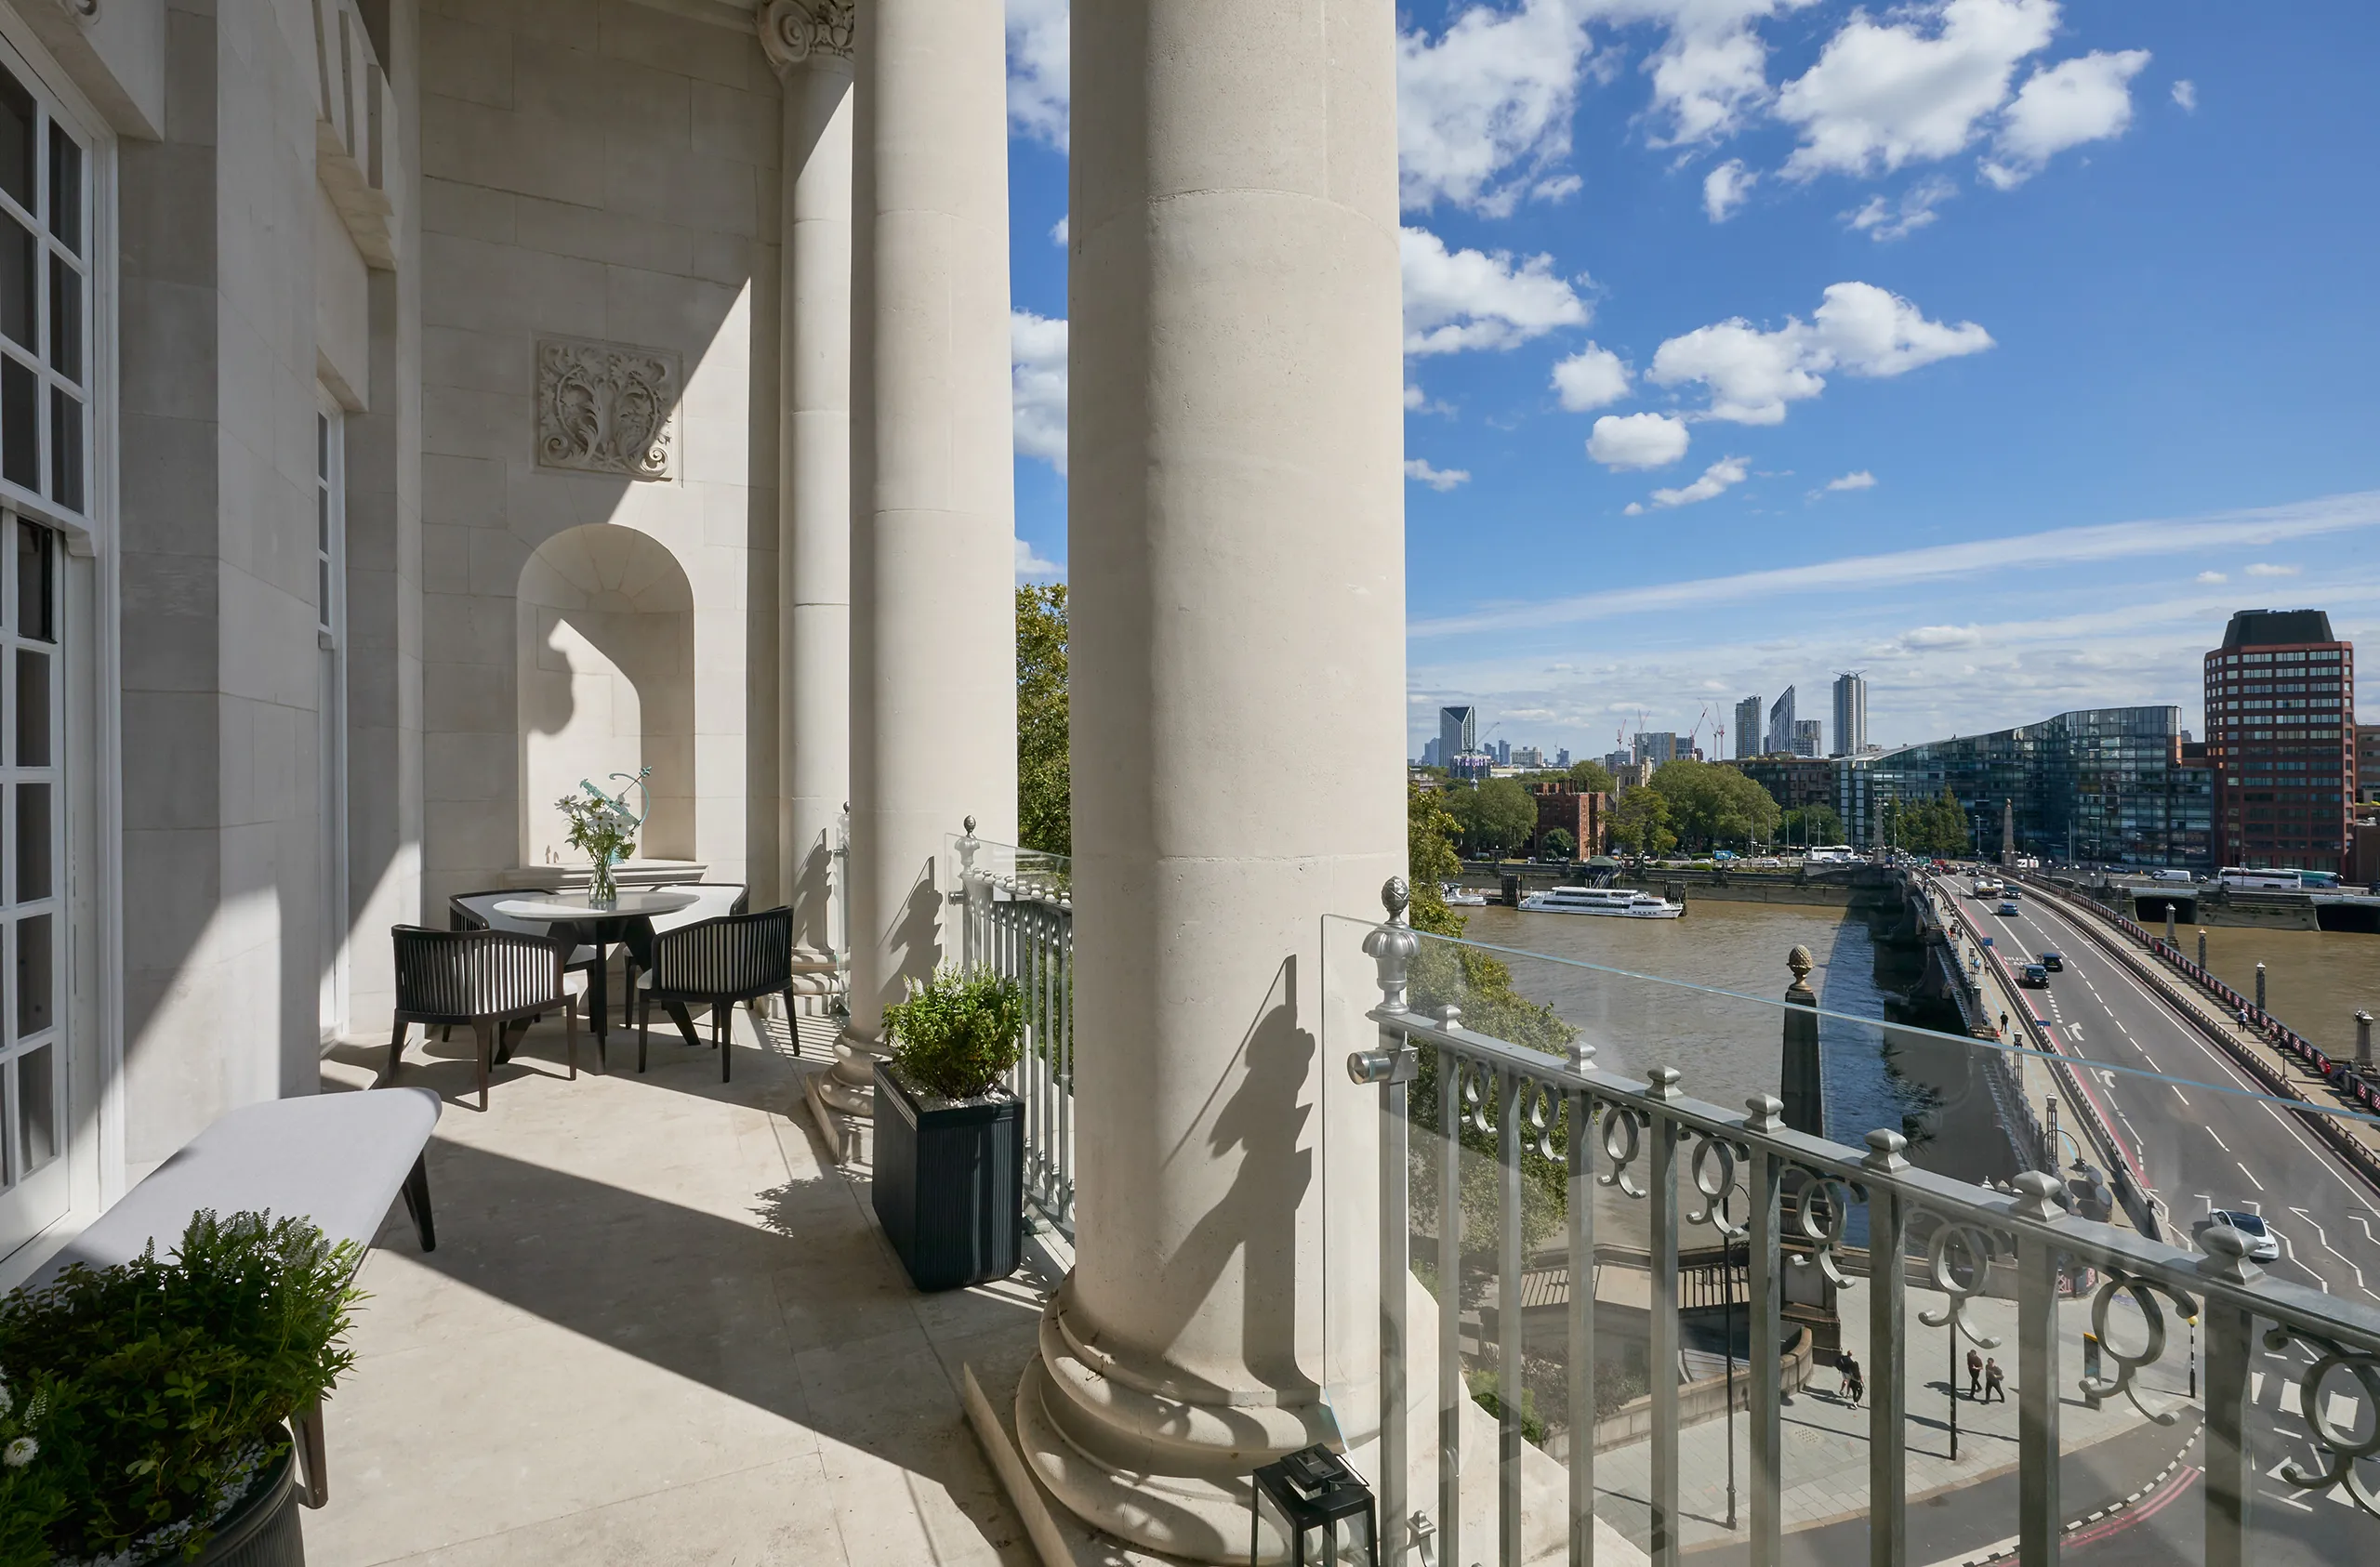 The terrace at Katharine Pooley's Millbank interior design project in central london, next to westminster